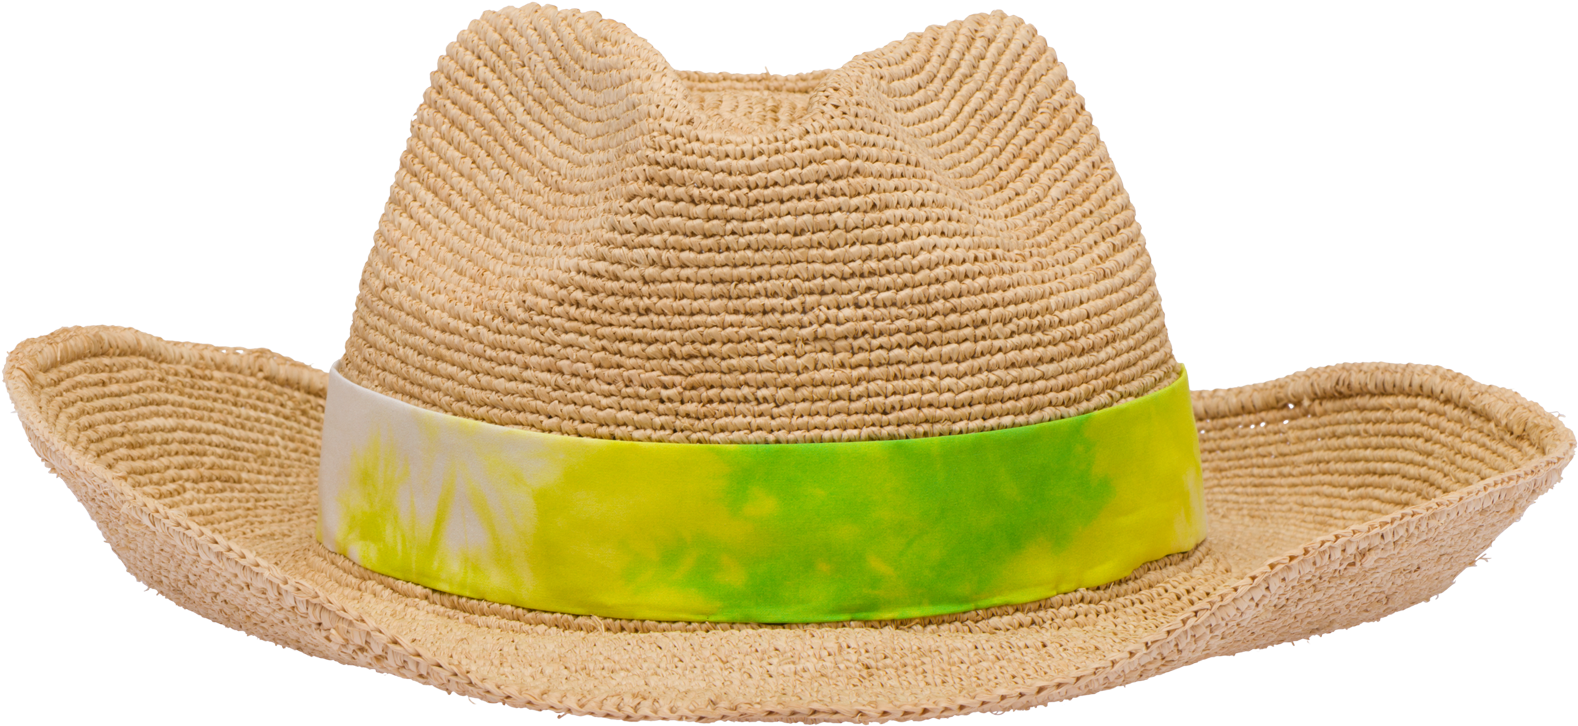 Sombrero Clipart - Large Size Png Image - PikPng